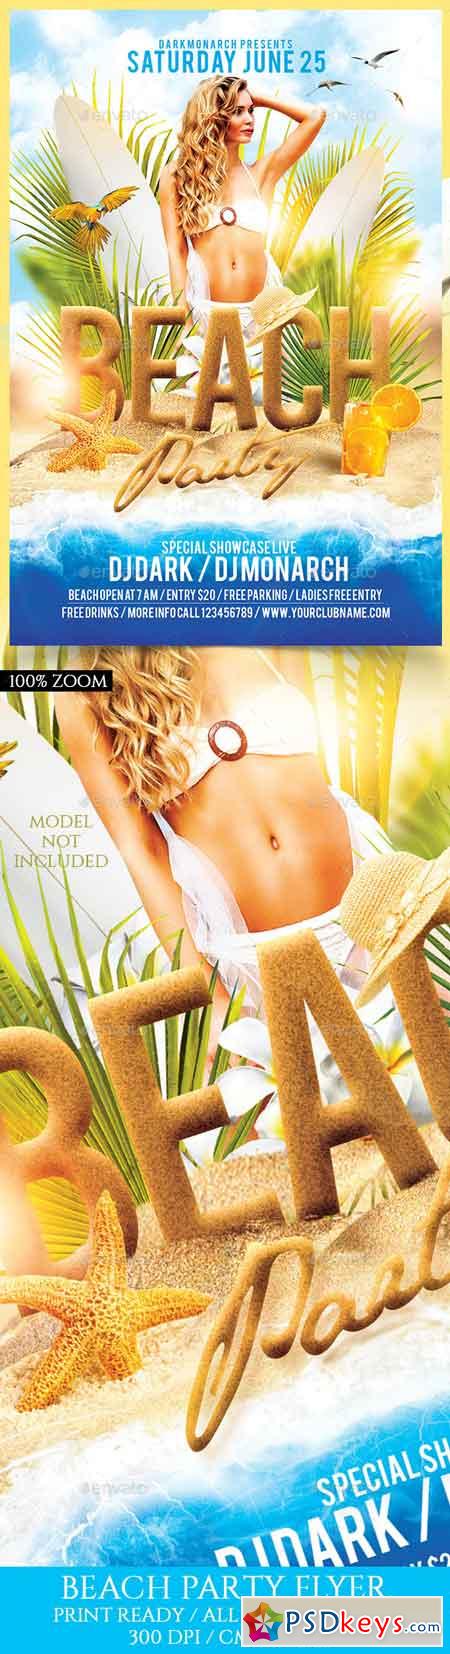 Beach Party Flyer Template 16435179